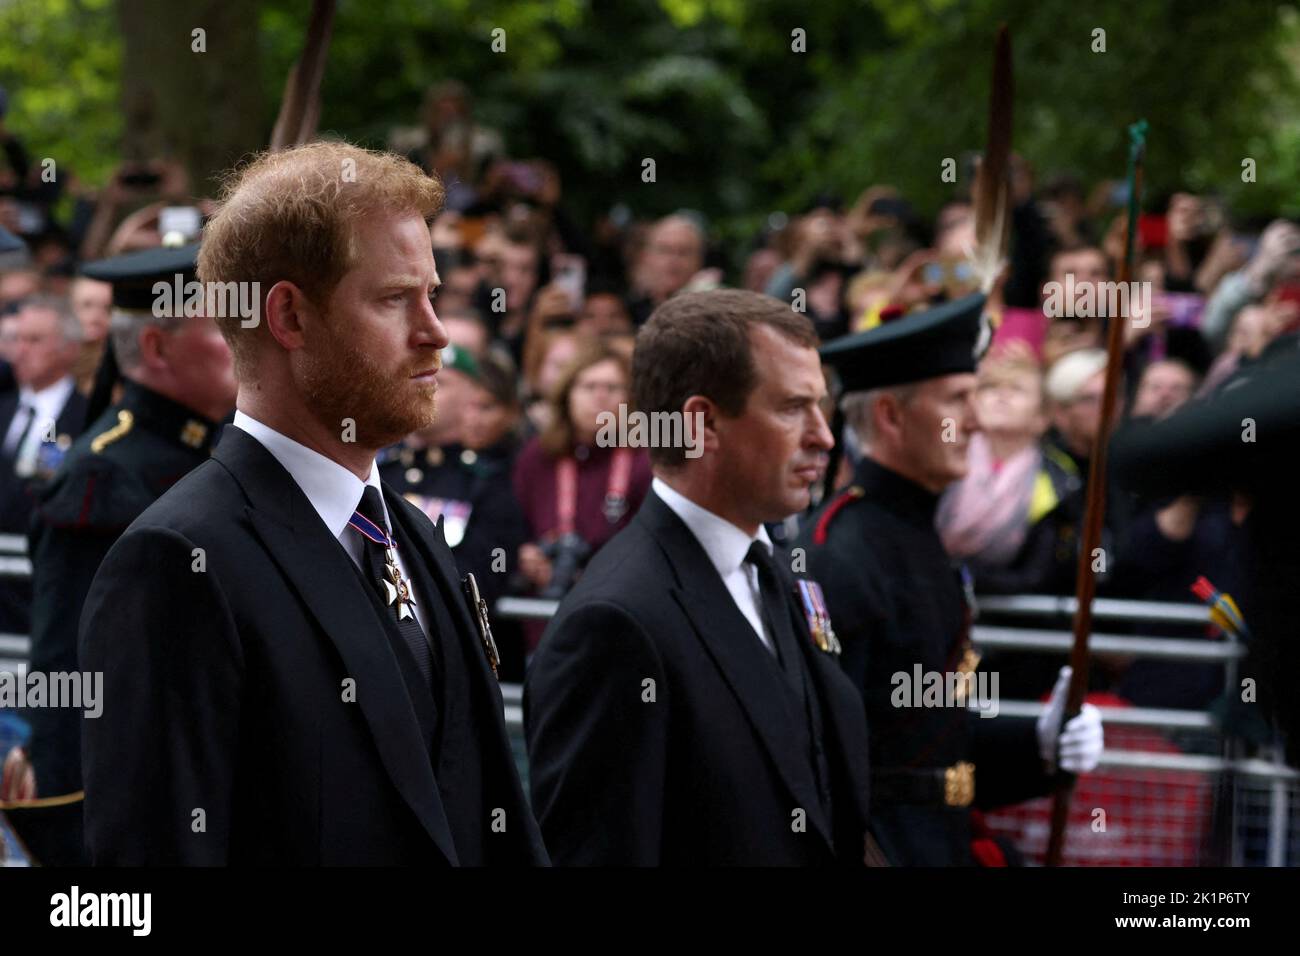 Britain's Prince Harry, Duke of Sussex attends the state funeral and burial of Britain's Queen Elizabeth, in London, Britain, September 19, 2022. REUTERS/Tom Nicholson Stock Photo